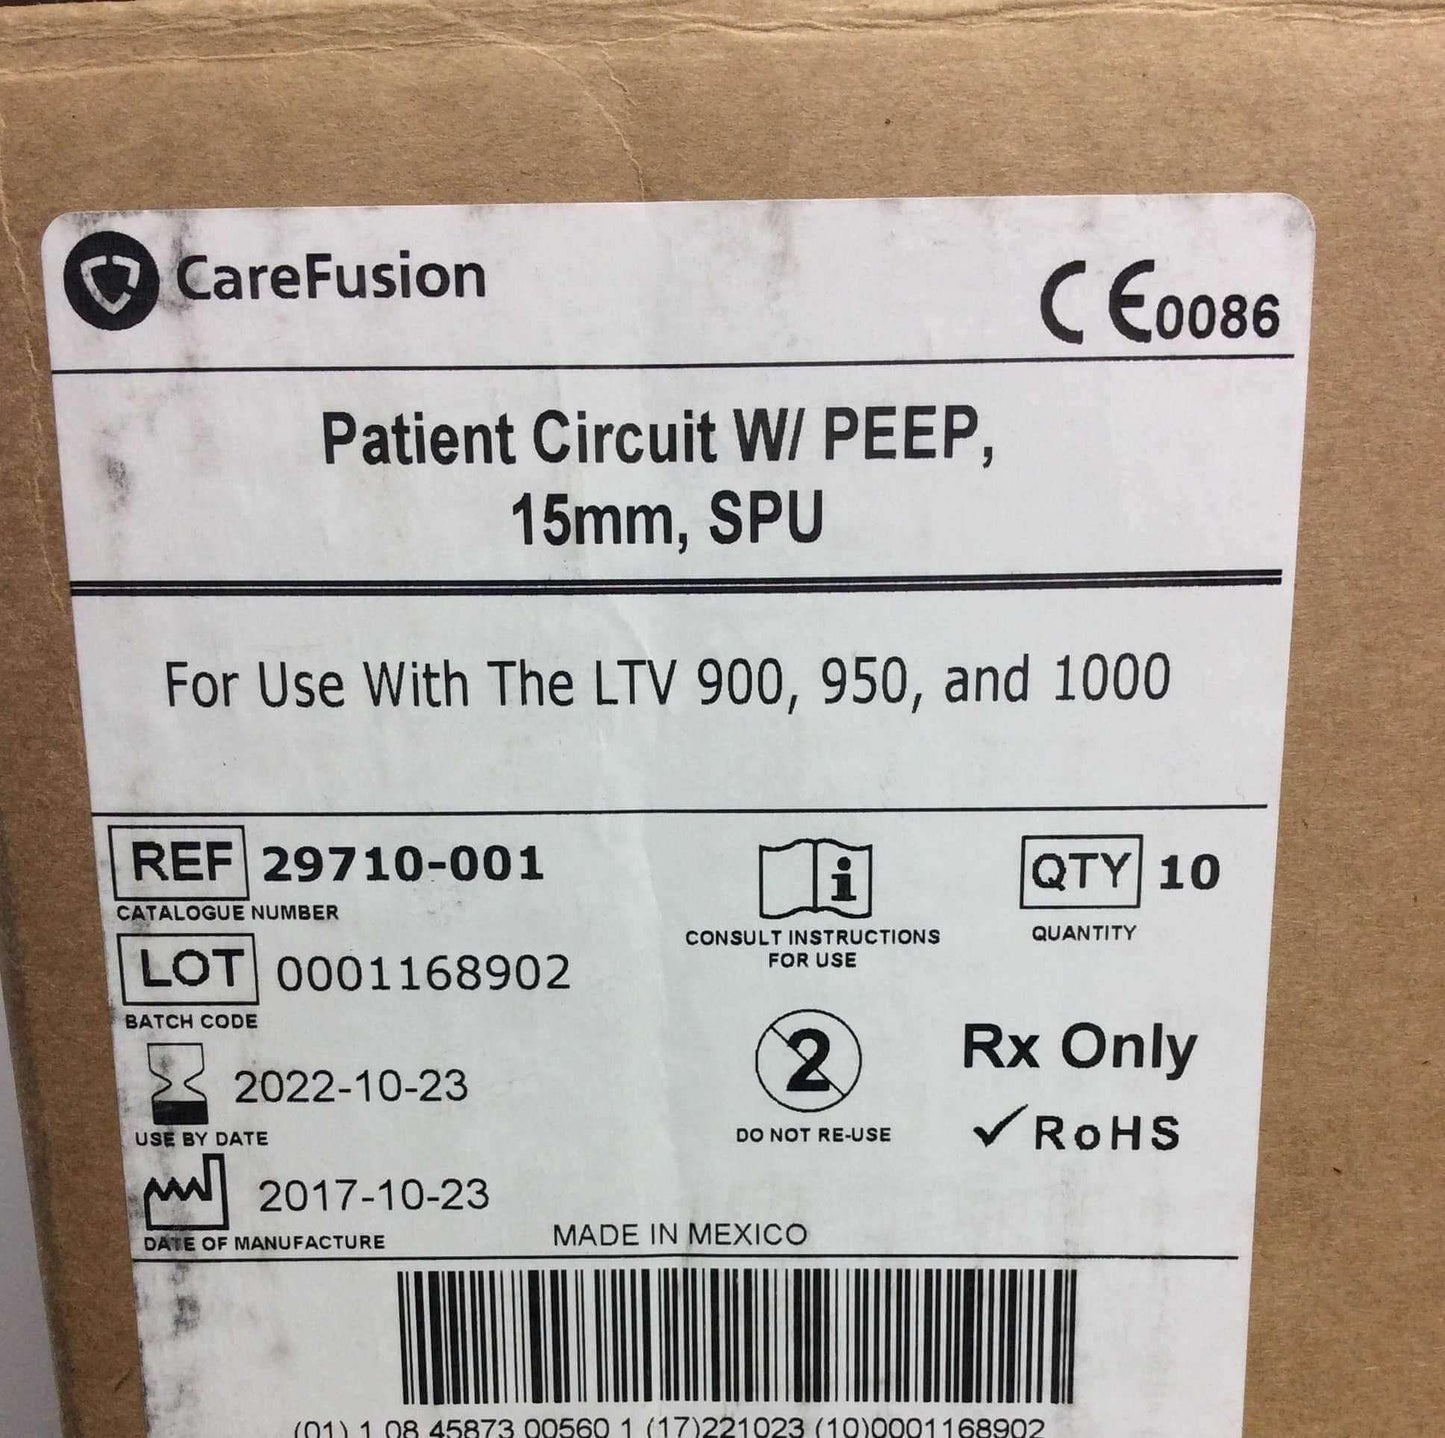 Case of 10 NEW CareFusion Patient Circuit with PEEP 15 mm, SPU 29710-001 10821X10 1168902 FREE Shipping - MBR Medicals